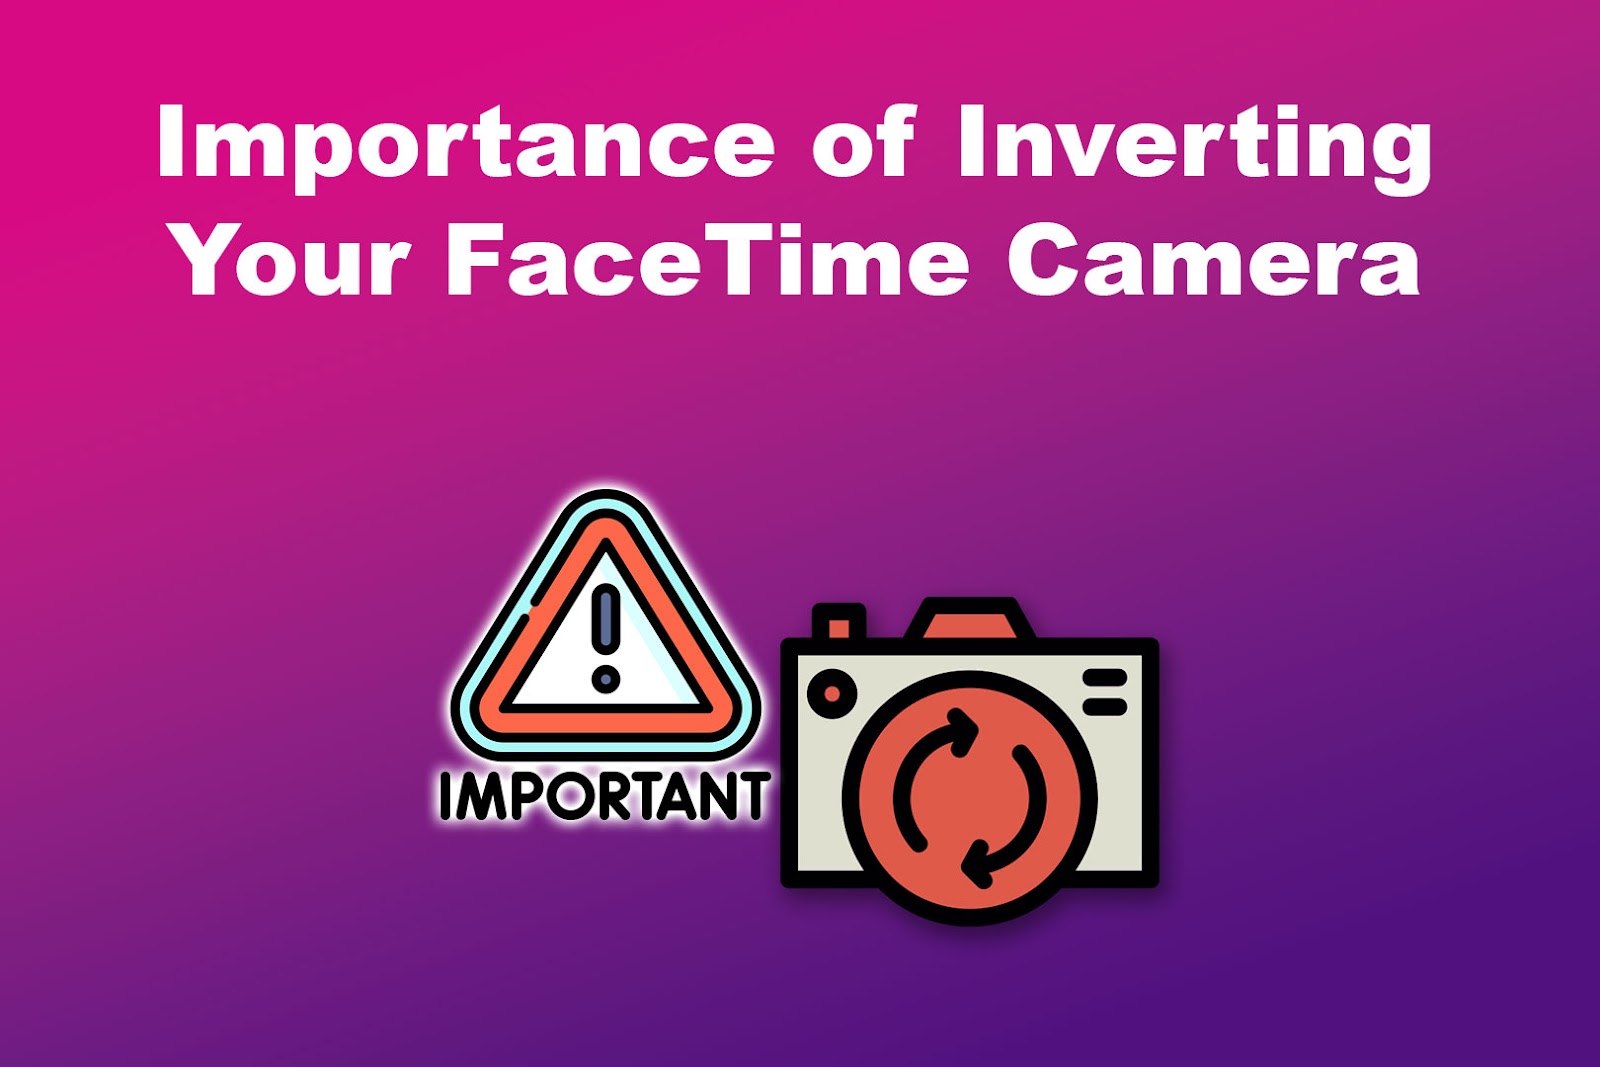 The Importance of Inverting Your FaceTime Camera